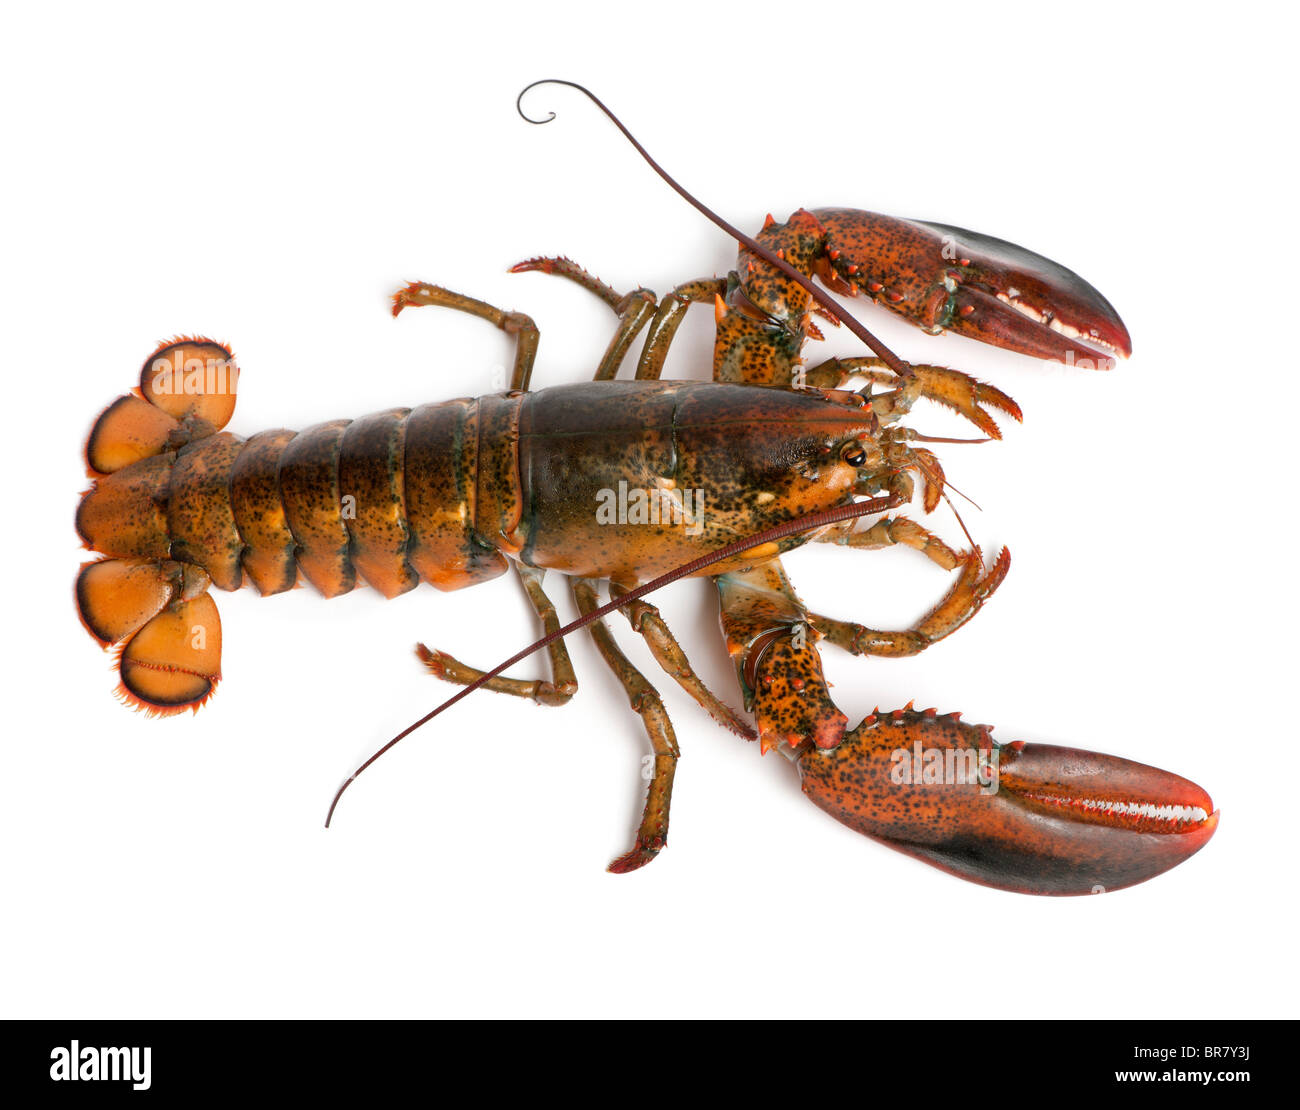 High angle view of American lobster, Homarus americanus, in front of white background Stock Photo